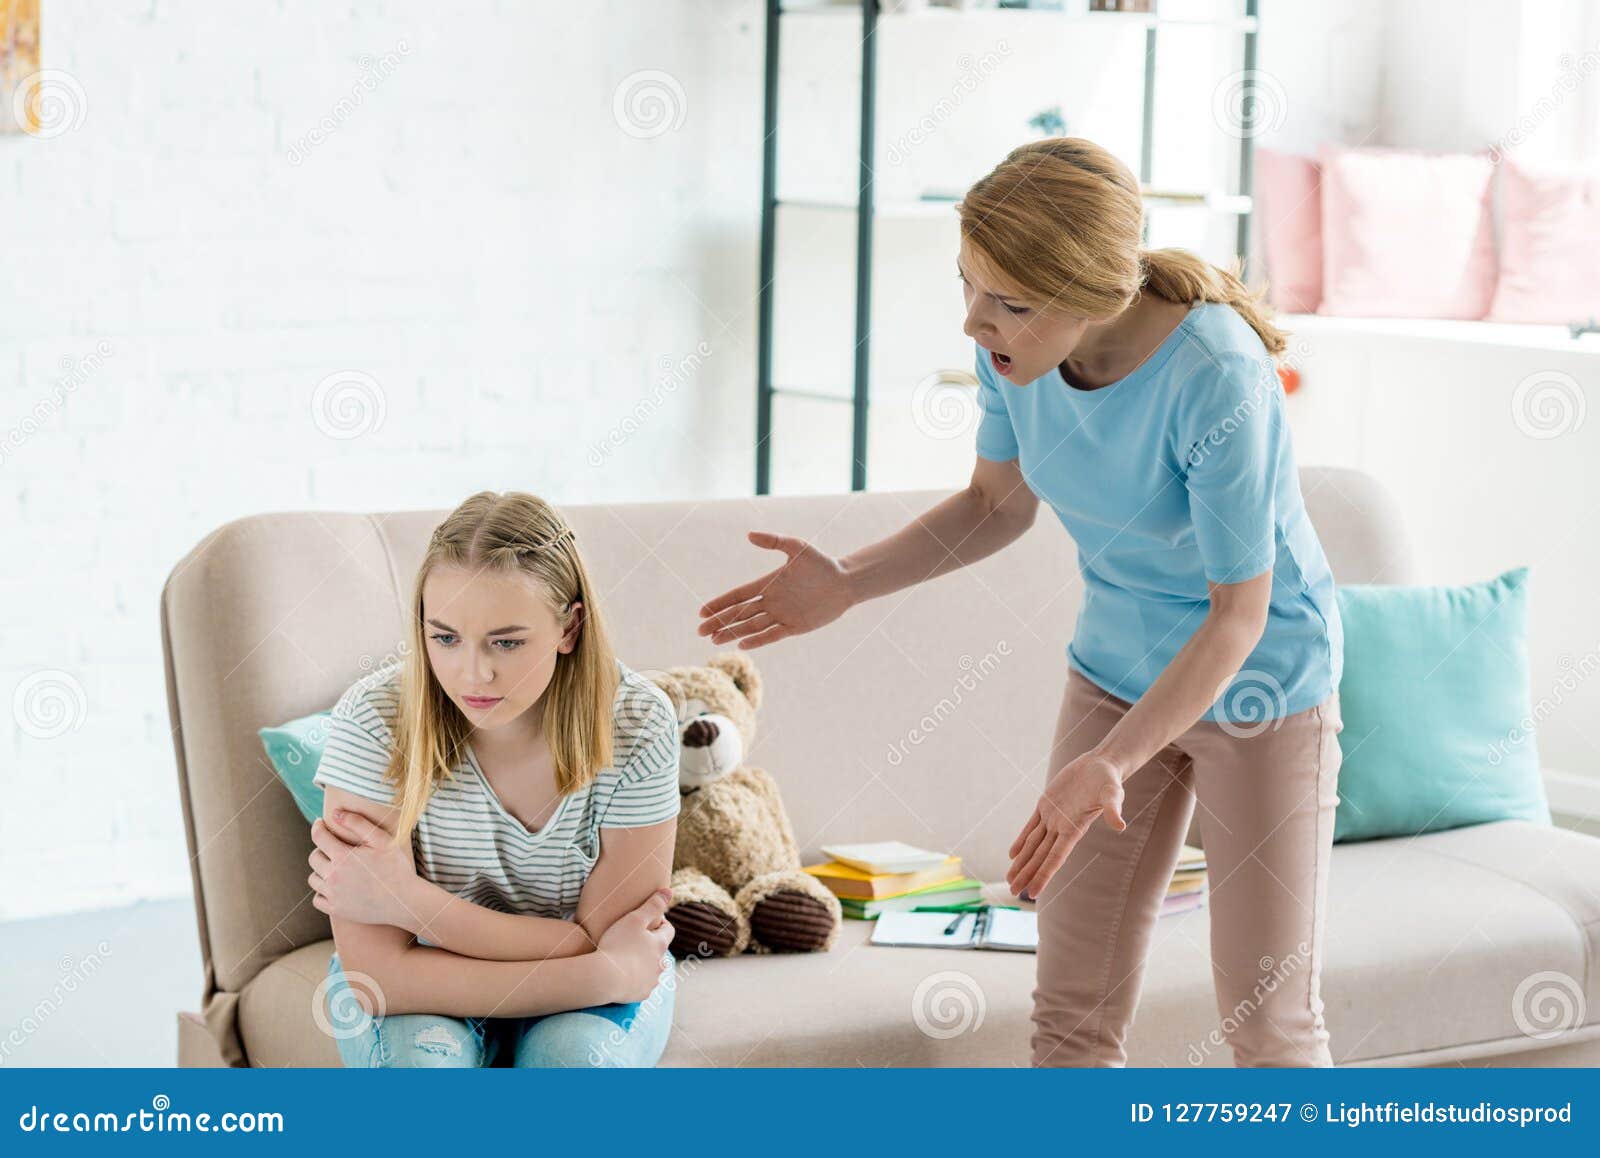 angry mother yelling at teen daughter